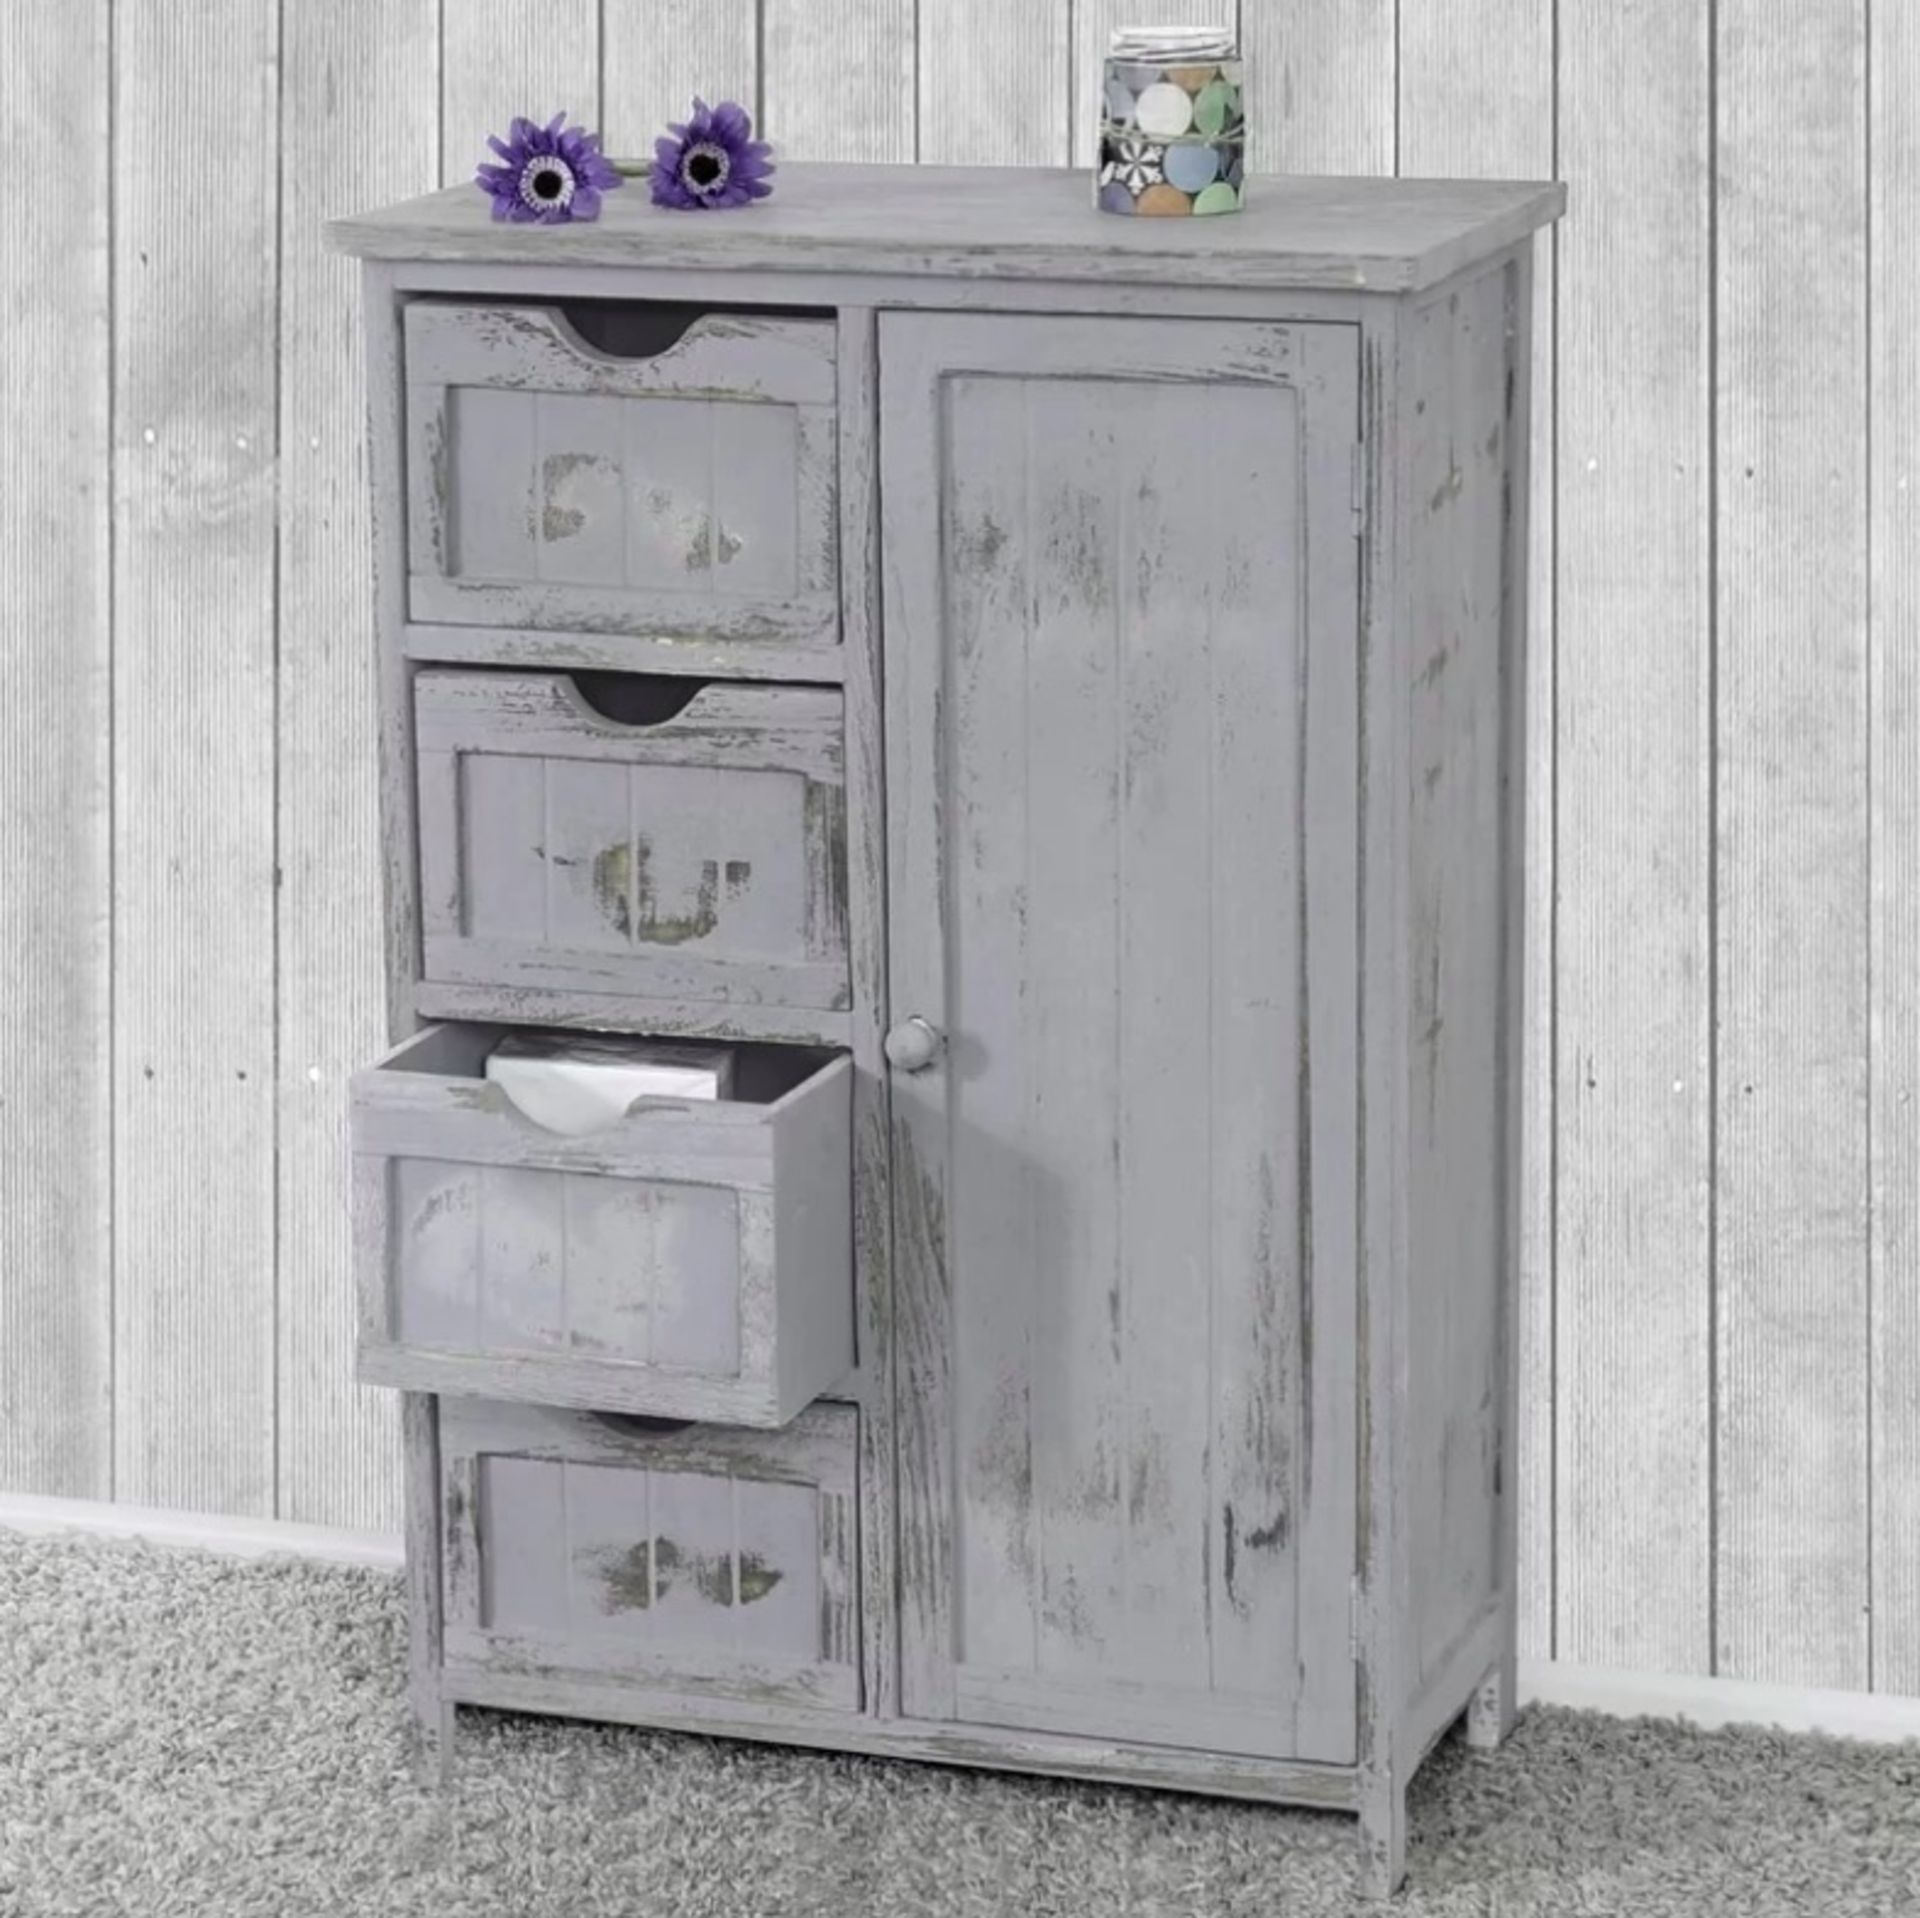 4 Drawer Combi Chest Great Combi Chest Single Door With Four Drawers Embraces Rustic Living And Lets